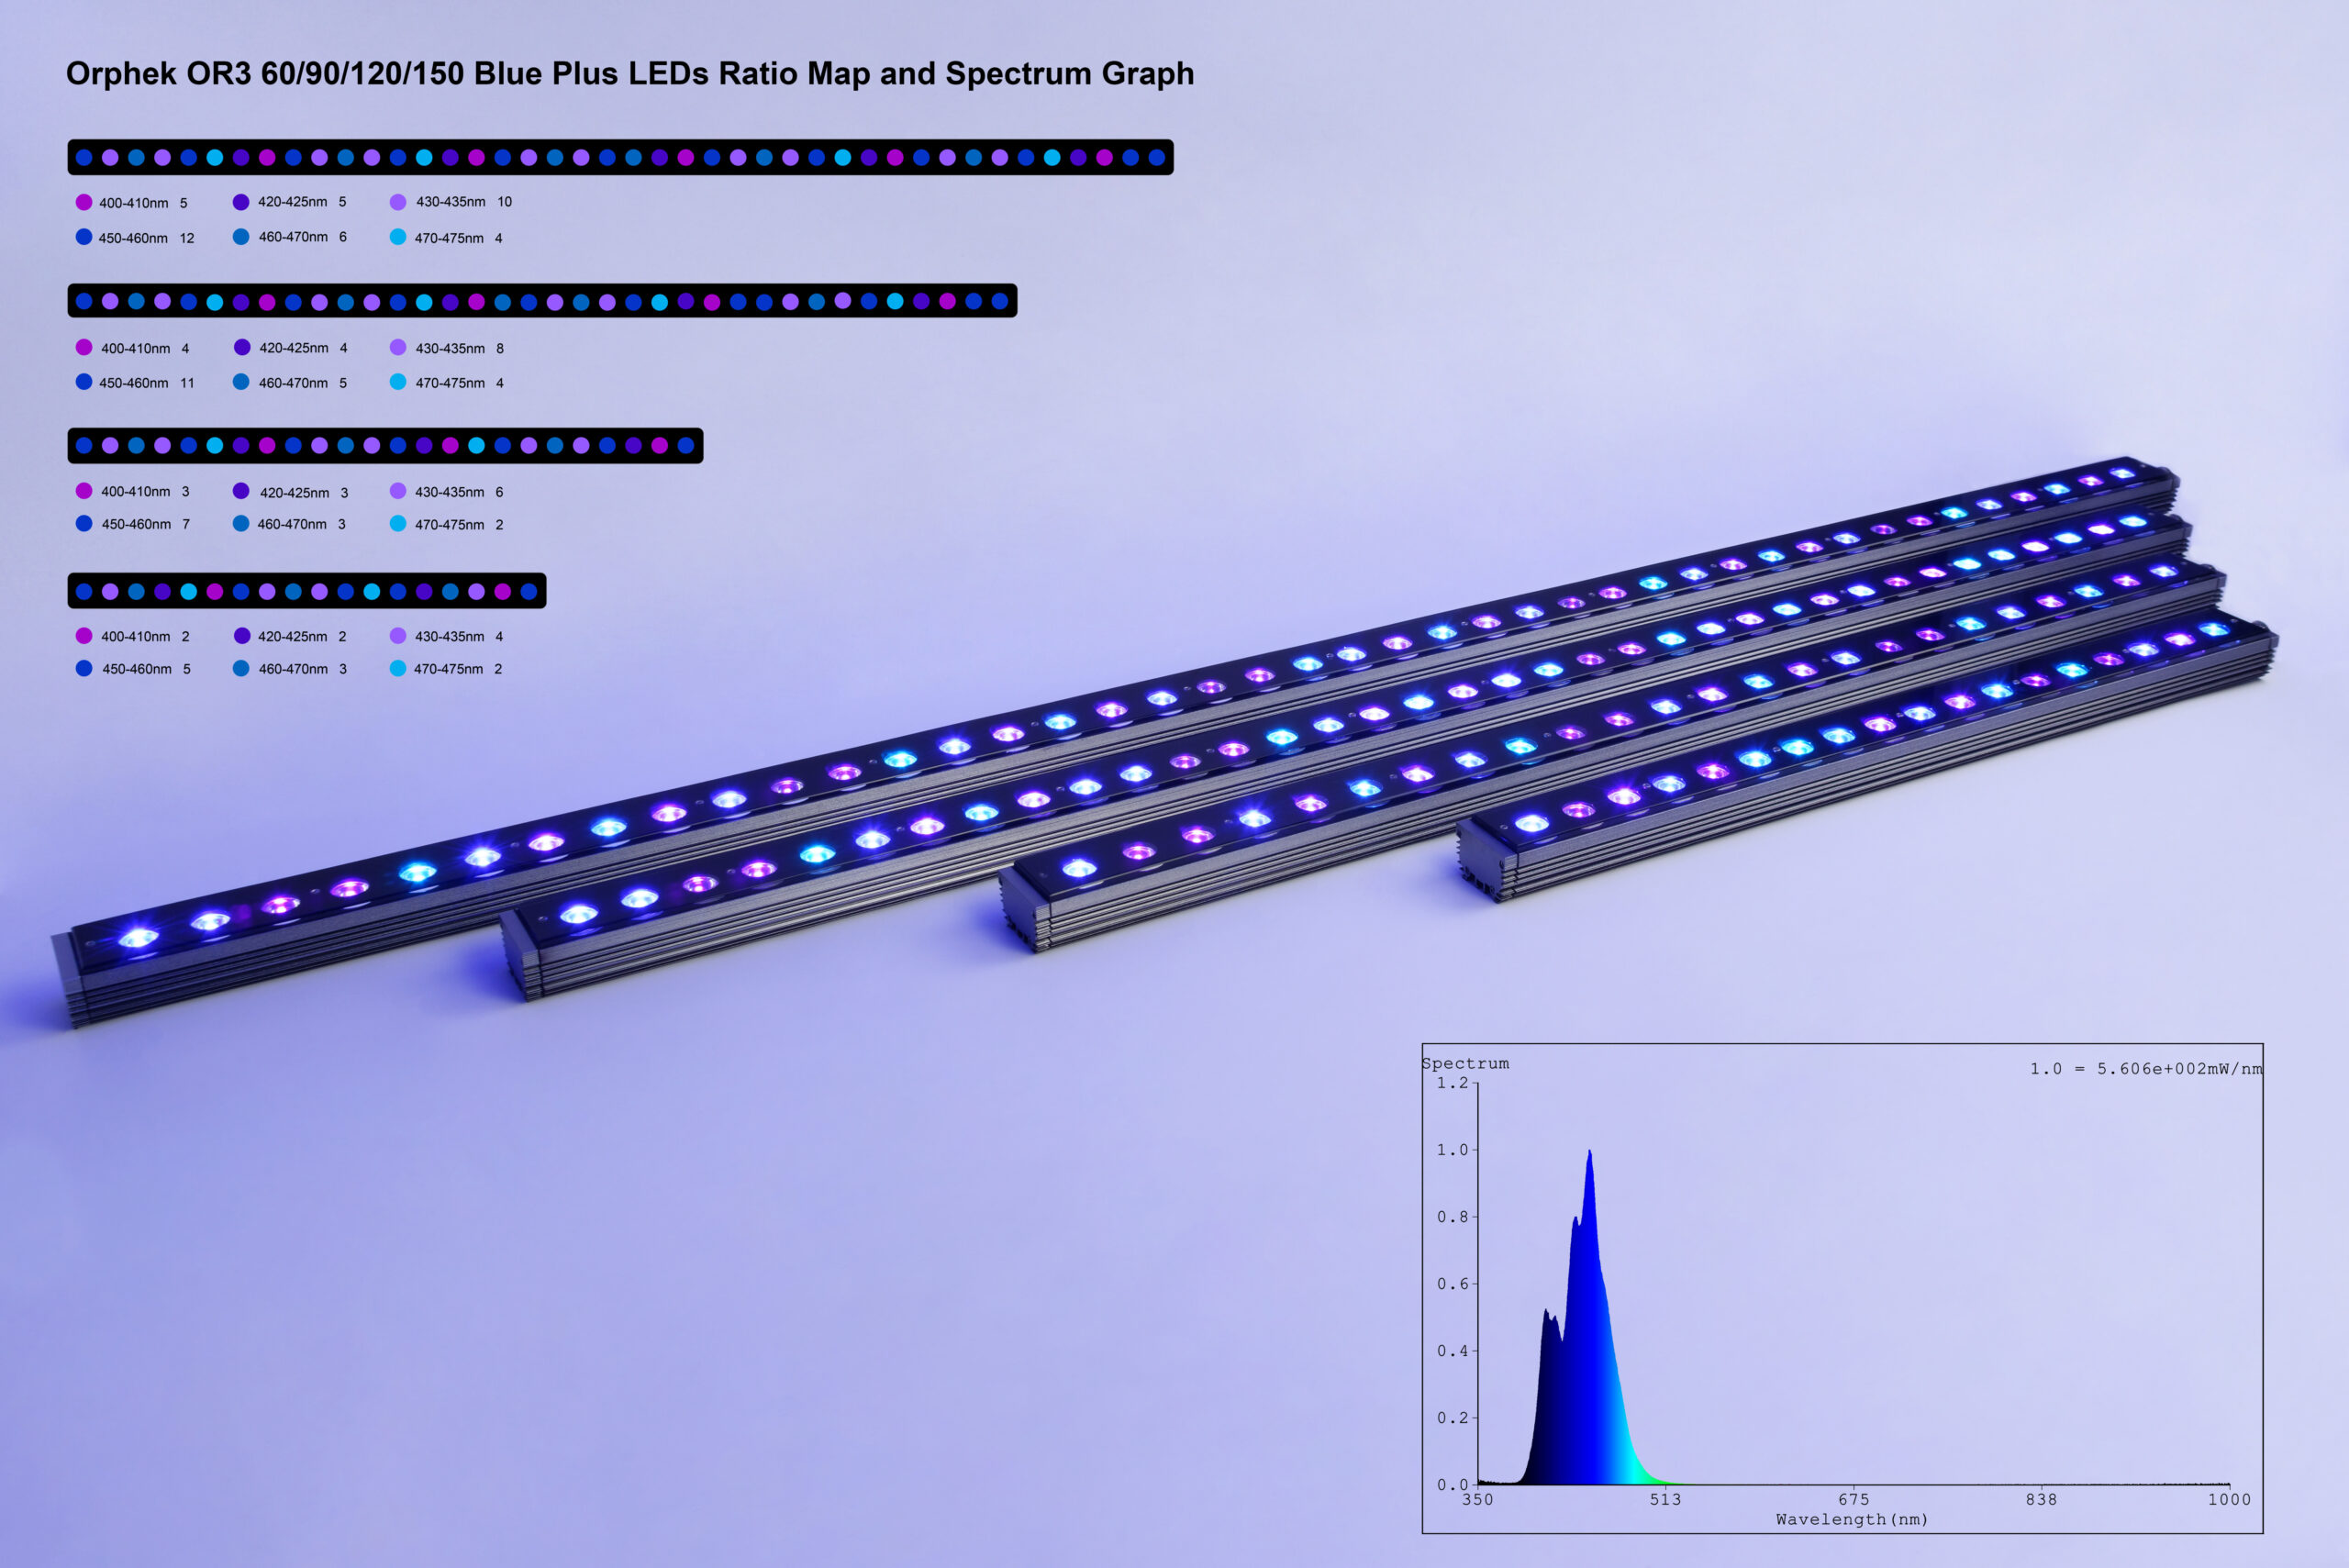 Orphek-or3-Blue-Plus-LEDs-ratio-map-and-spectrum-graph